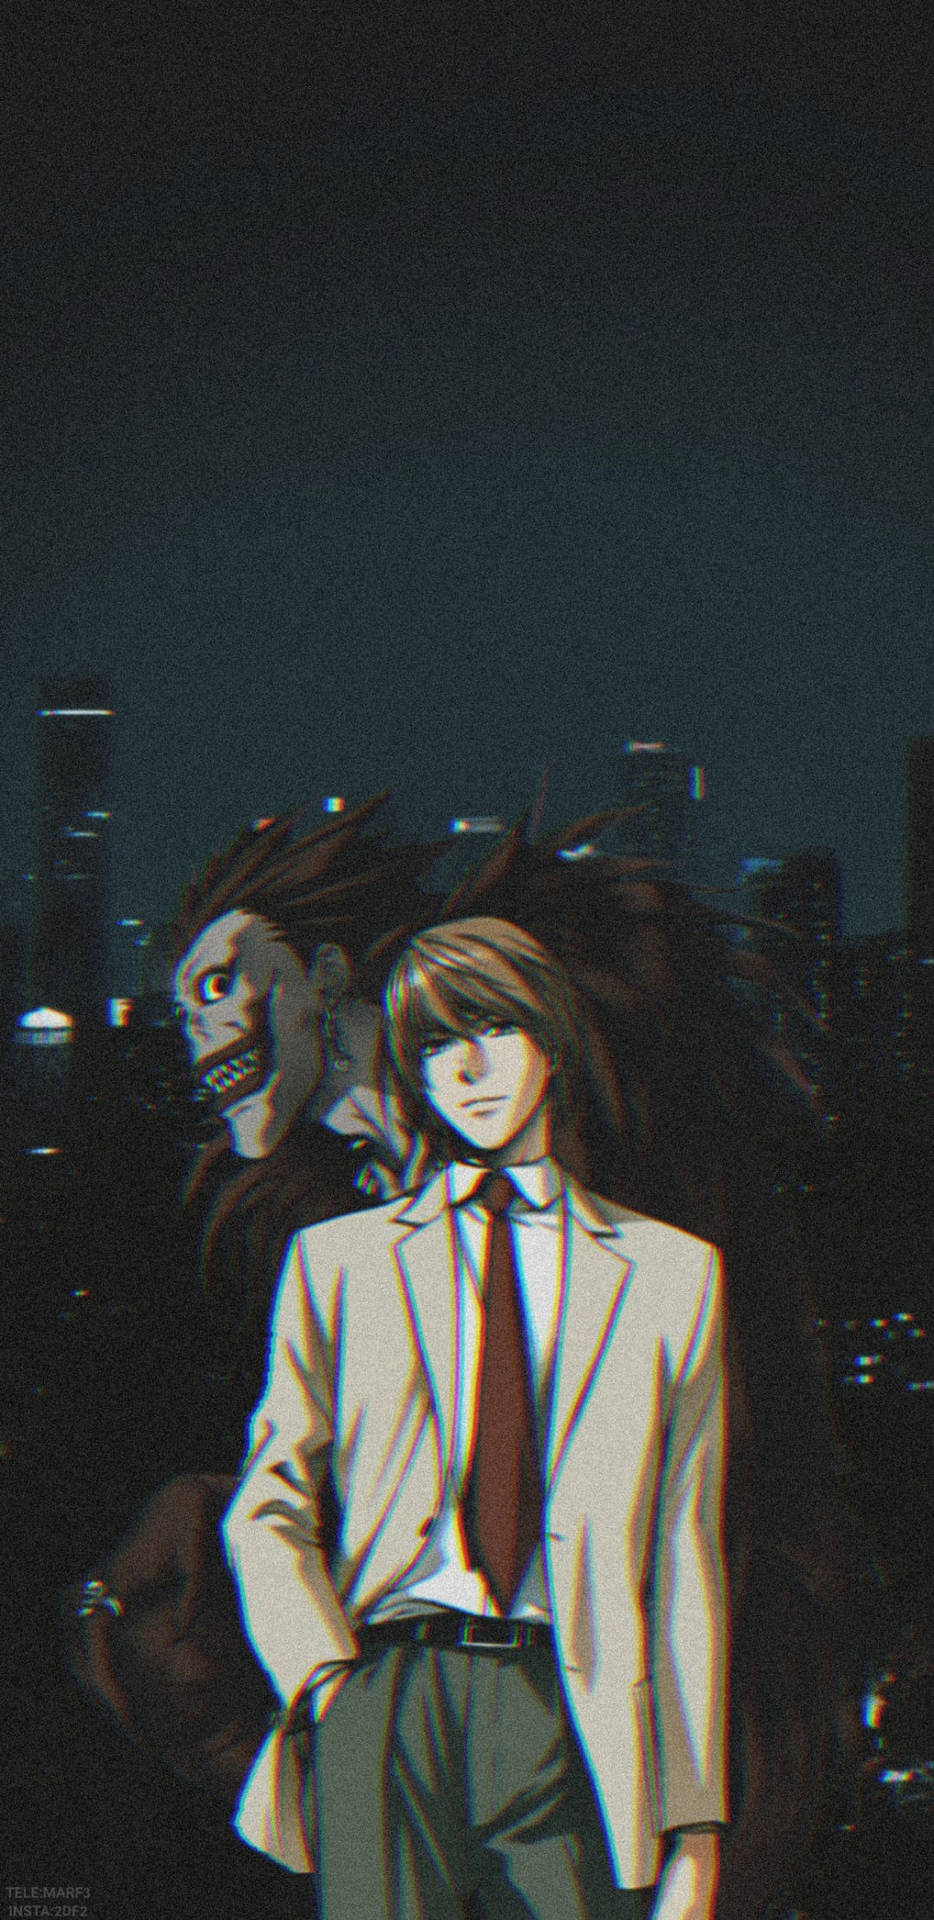 Light, Ryuk, And City Death Note Phone Wallpaper